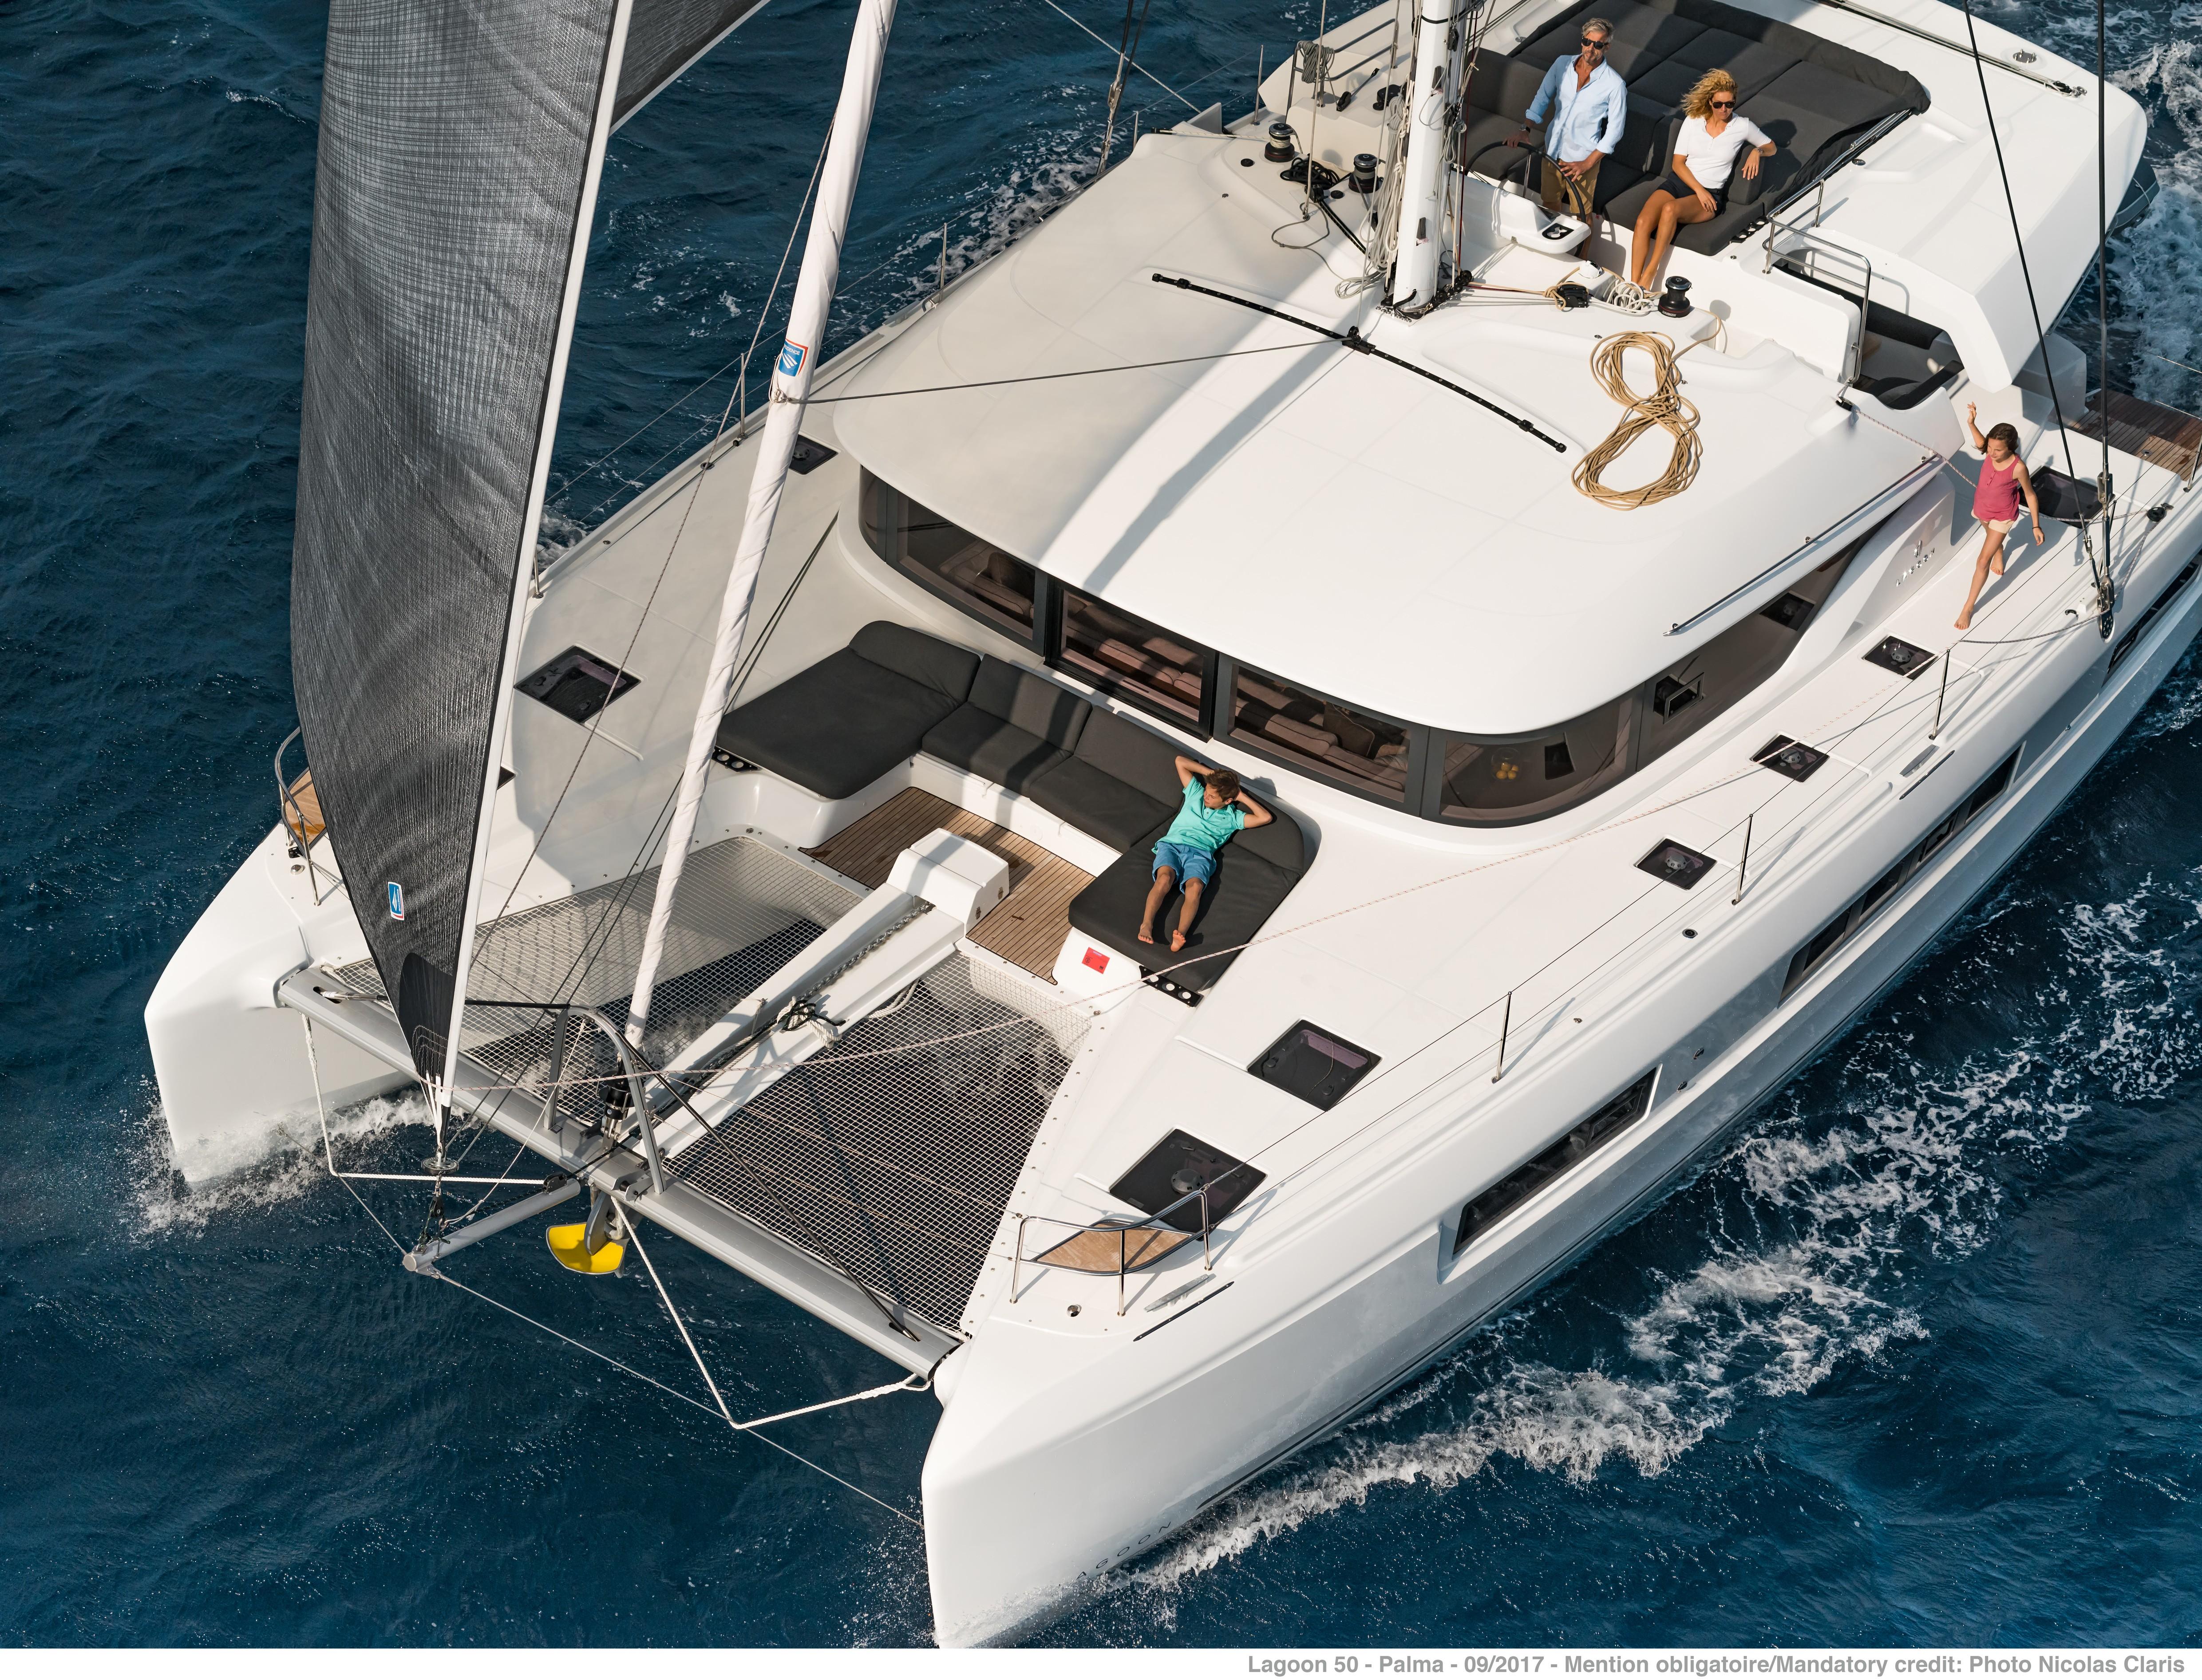  Yacht Photos Pics Manufacturer Provided Image: Lagoon 50